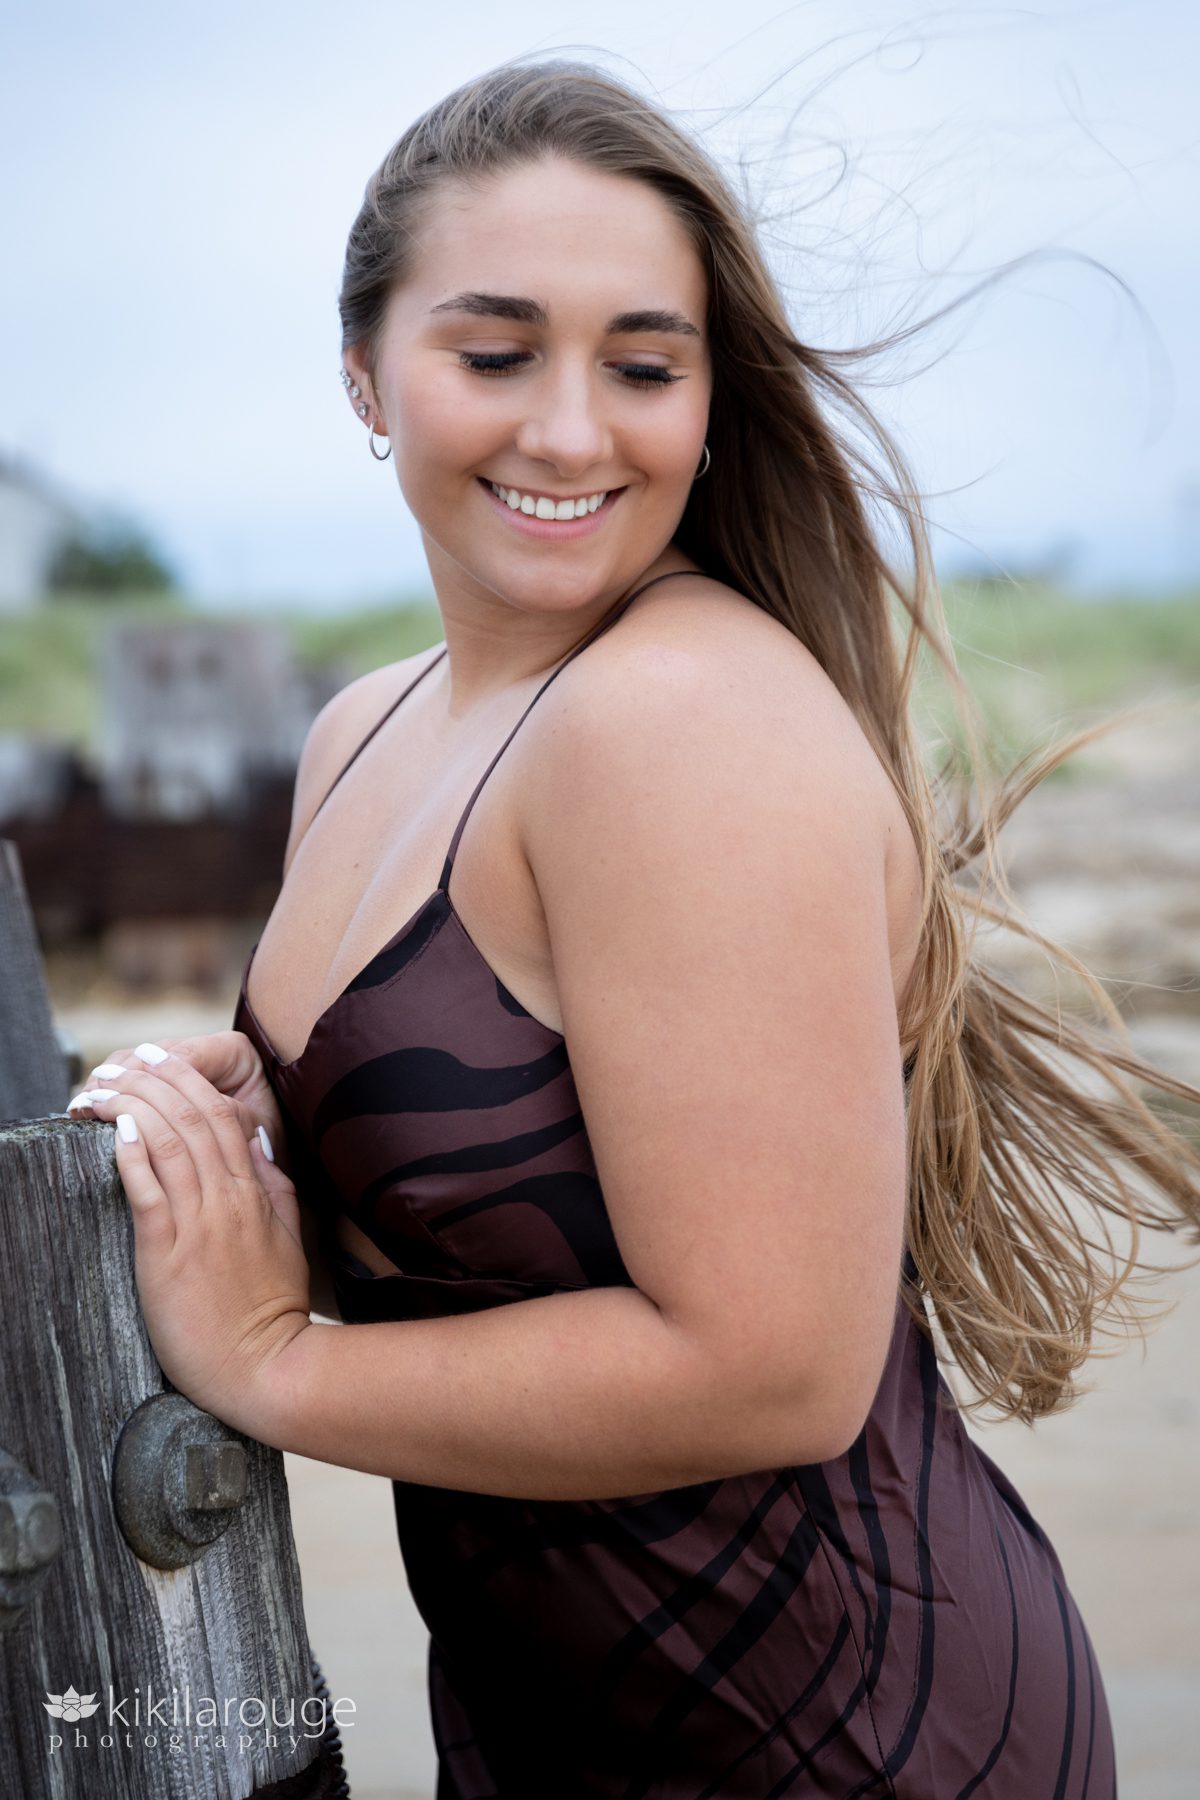 Girl in brown dress with hair blowing at Plum Island Beach looking down